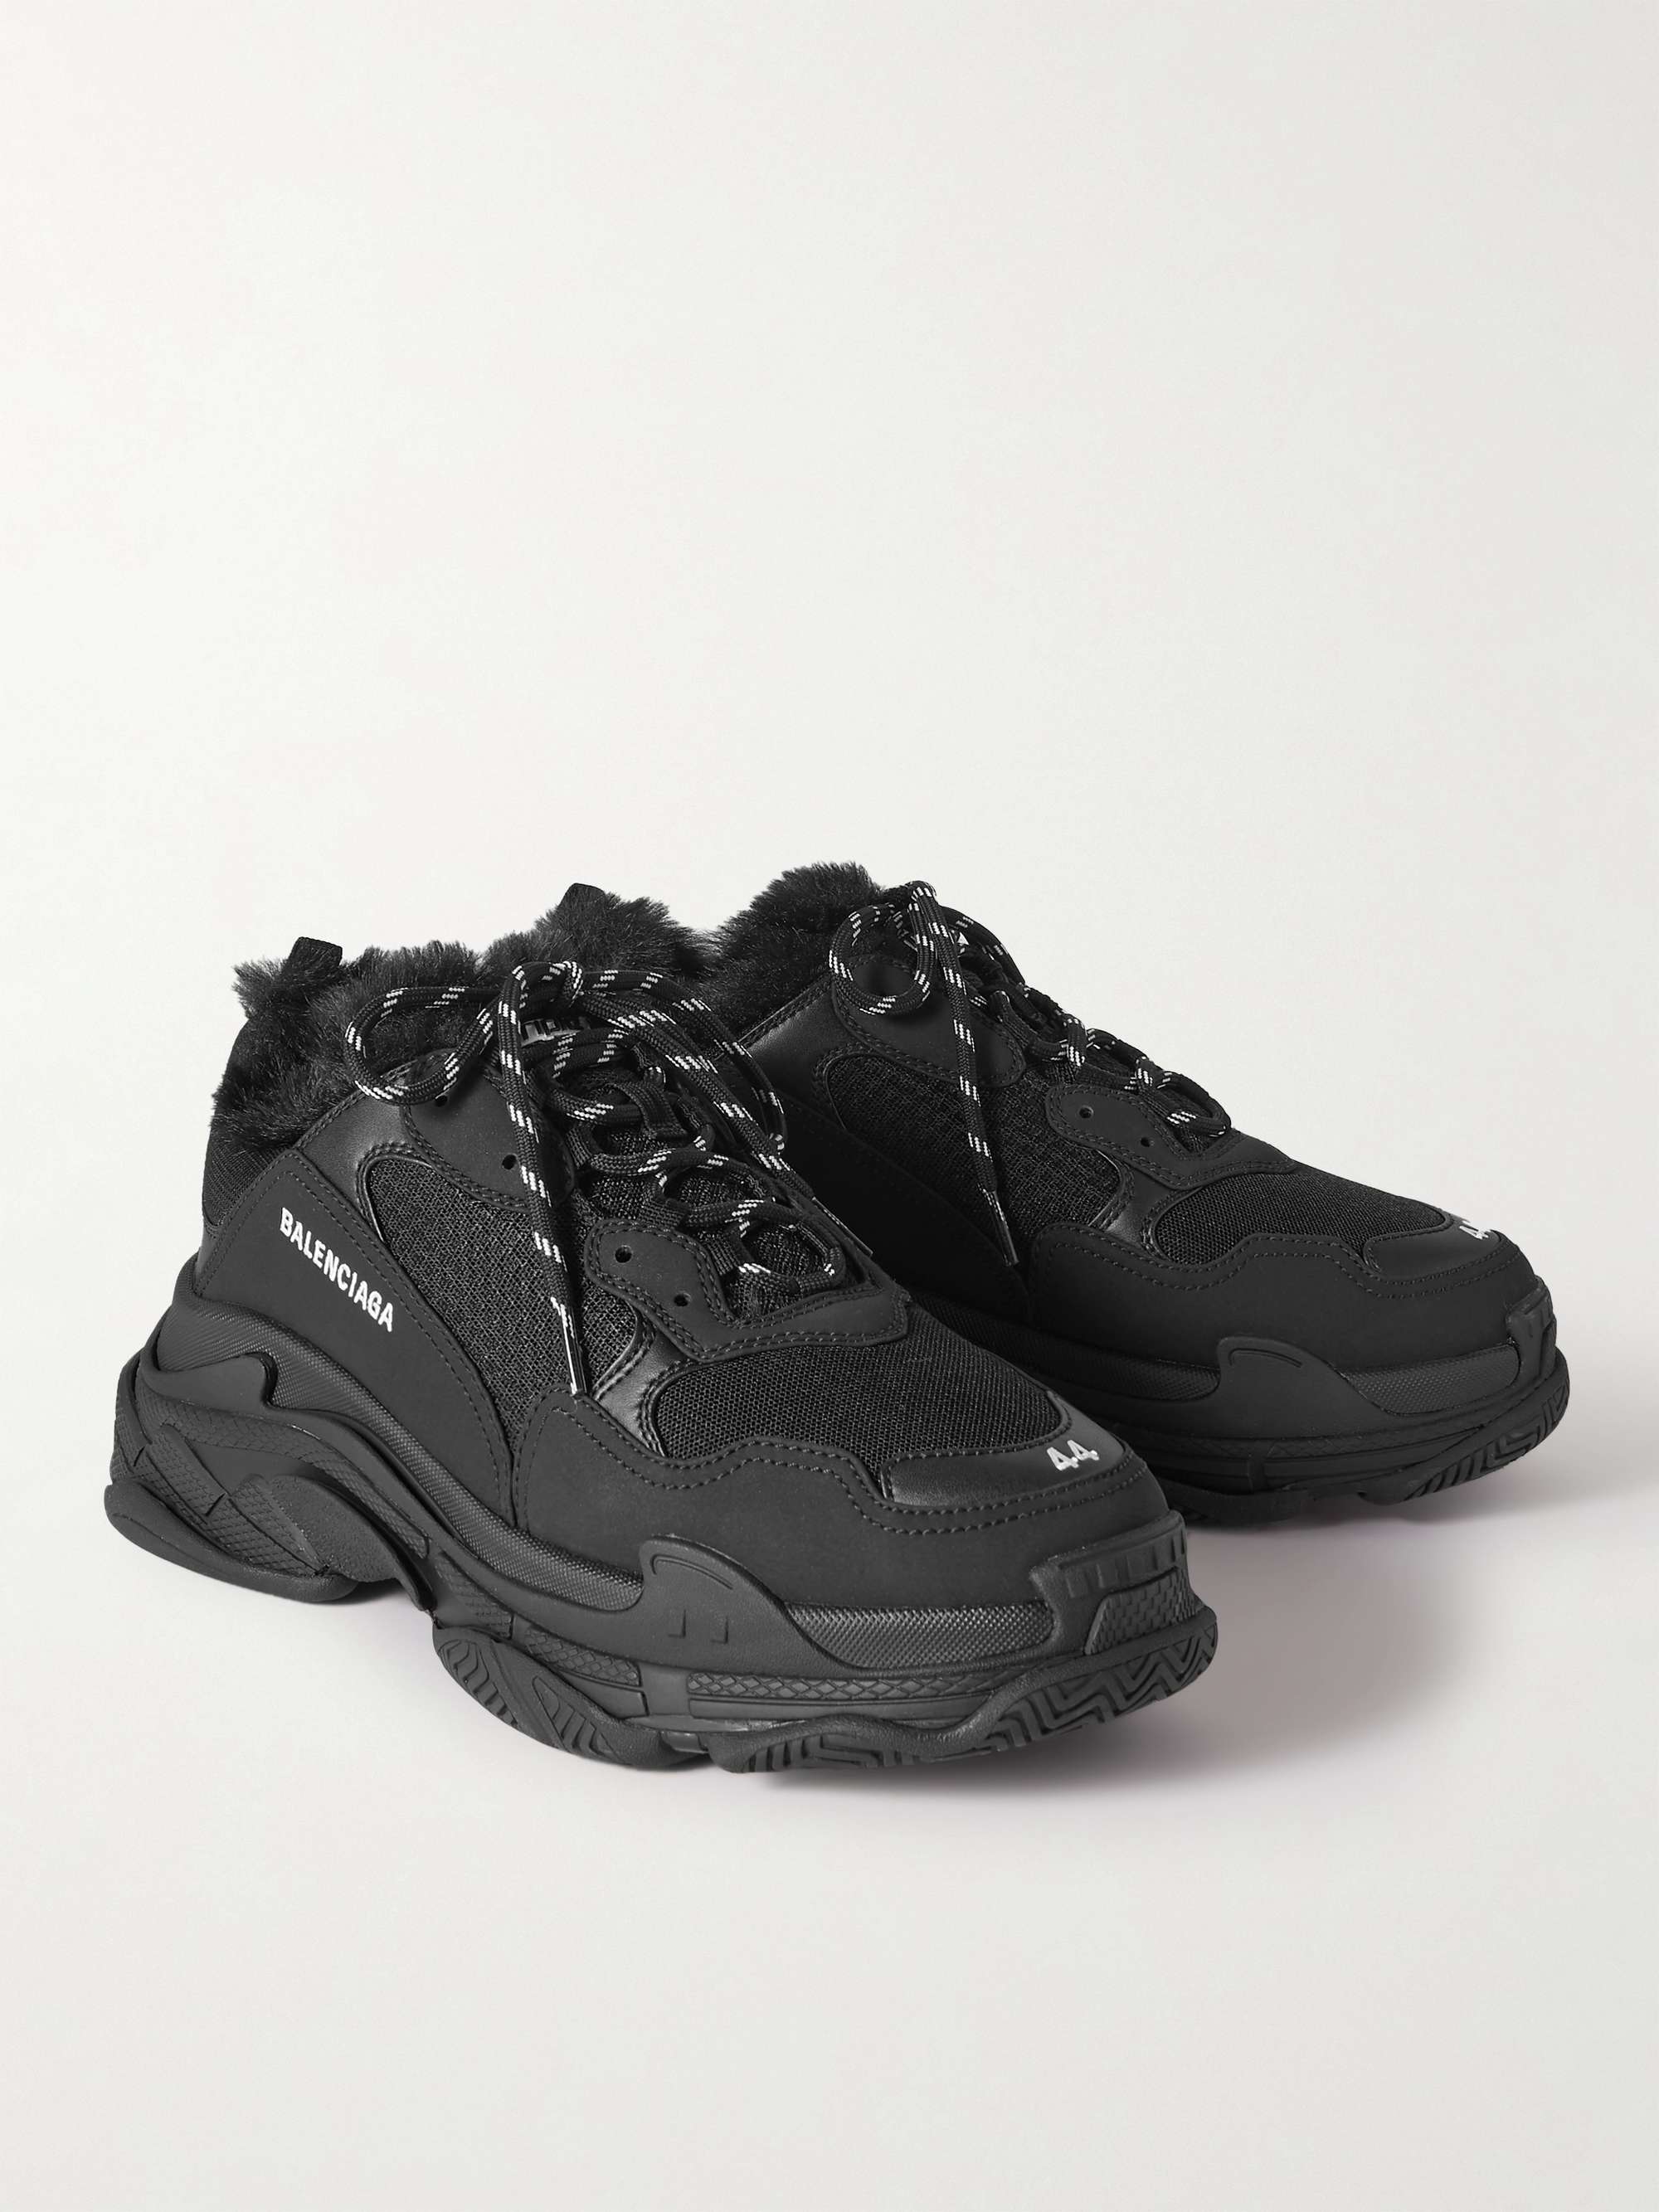 BALENCIAGA Triple S Faux Fur-Trimmed Mesh and Faux Leather Sneakers